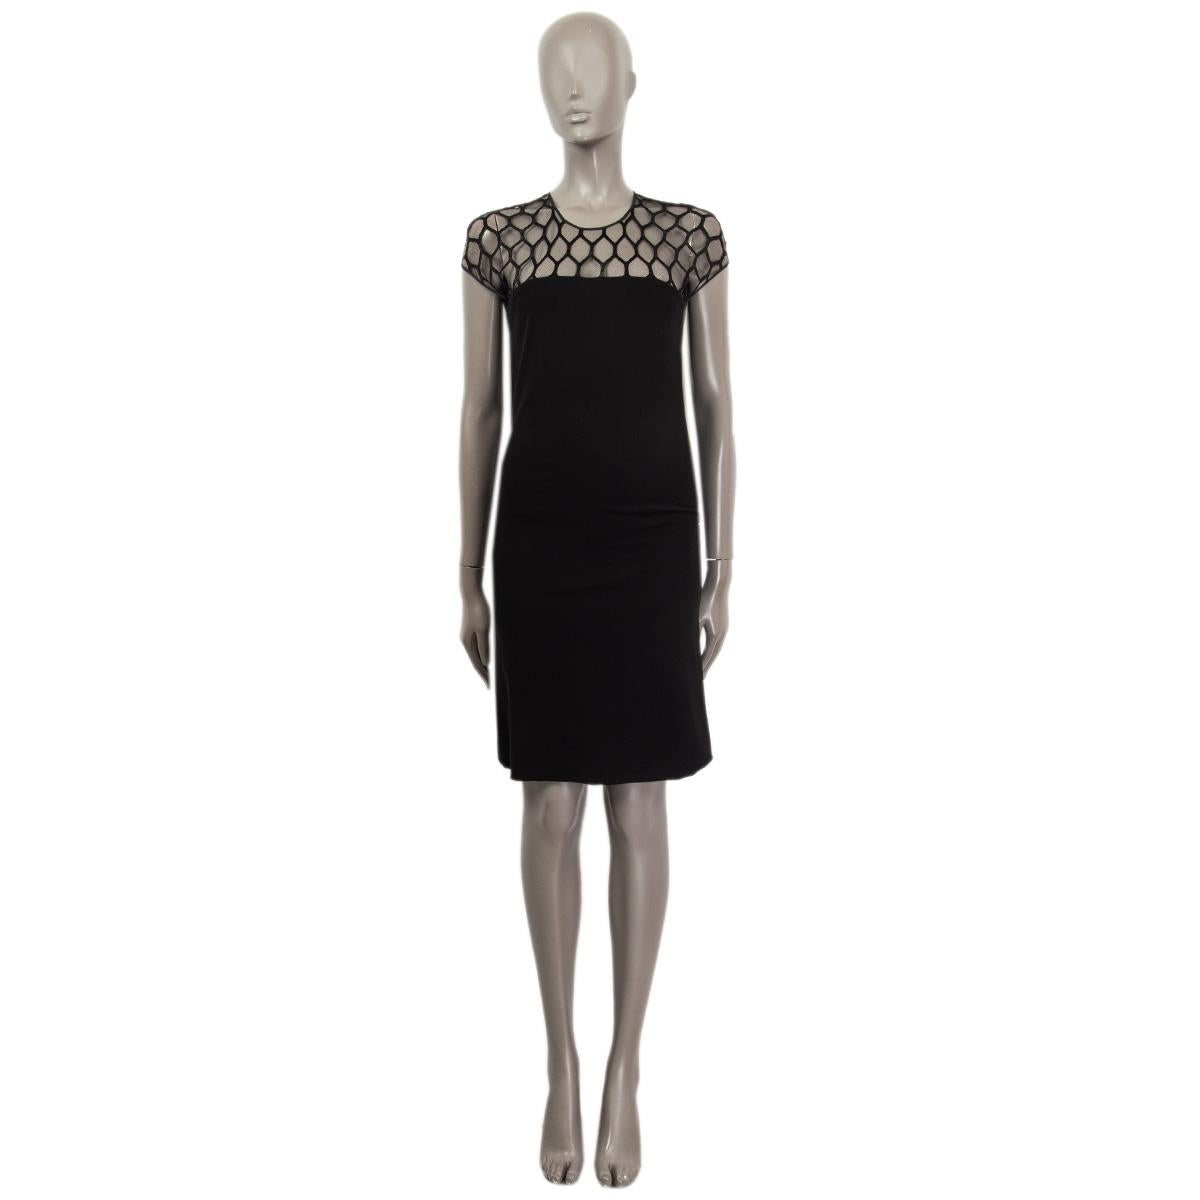 100% authentic Gucci sheath dress in black viscose (98%) and elastane (2%) with net-lace shoulder part. Opens with a zipper on the back. Unlined. Has been worn and is in excellent condition. 

Measurements
Tag Size	S
Size	S
Shoulder Width	42cm